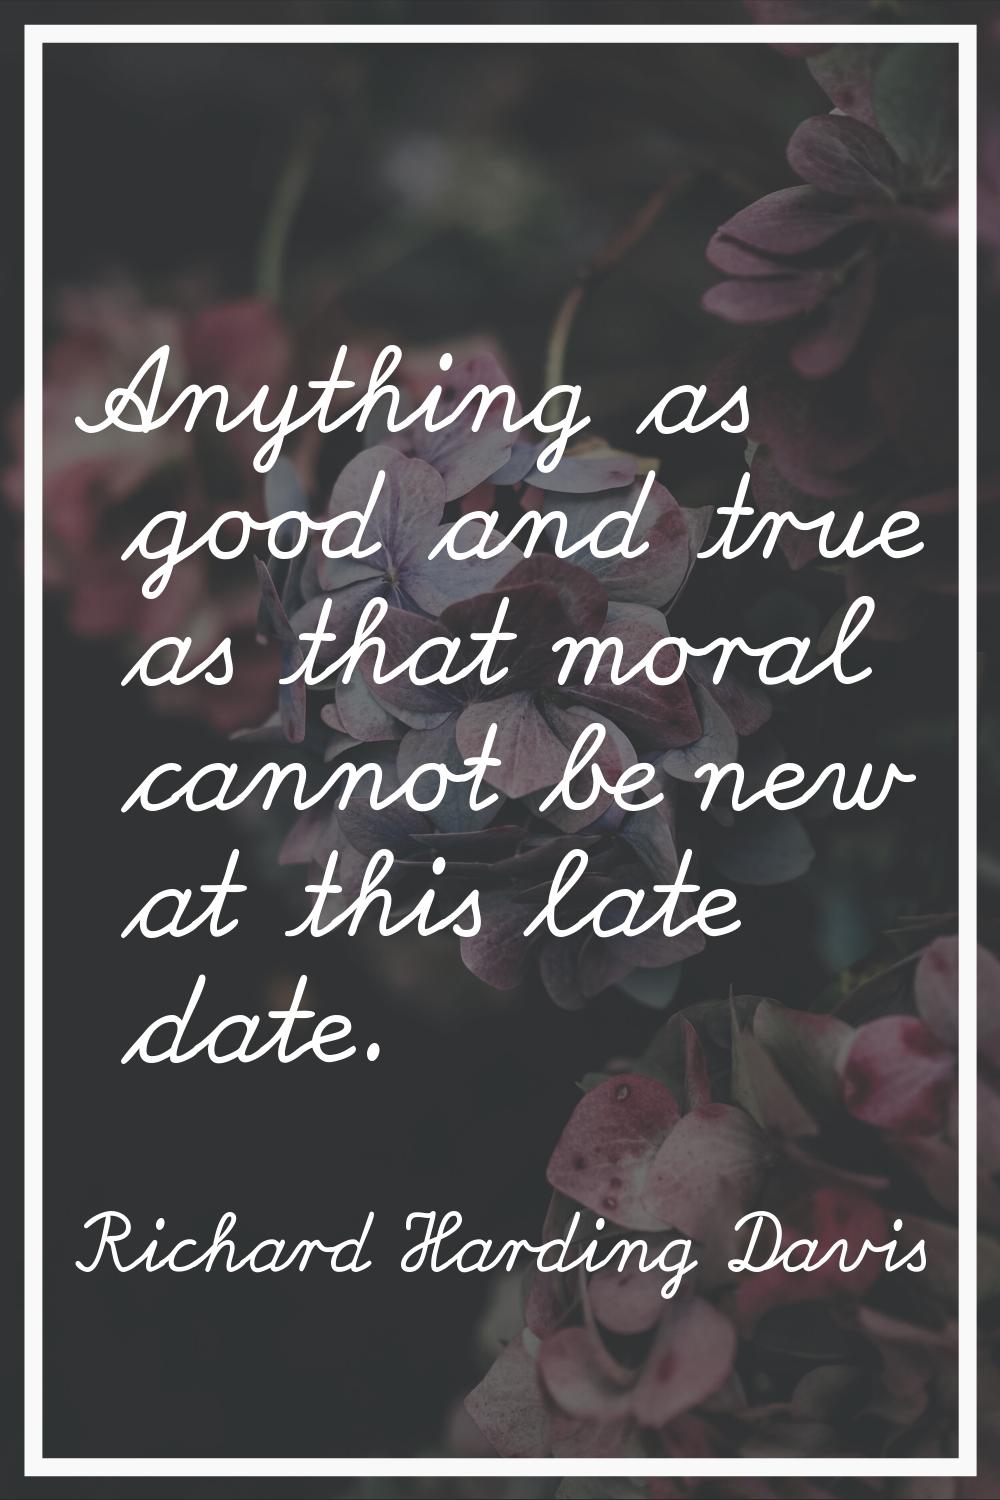 Anything as good and true as that moral cannot be new at this late date.